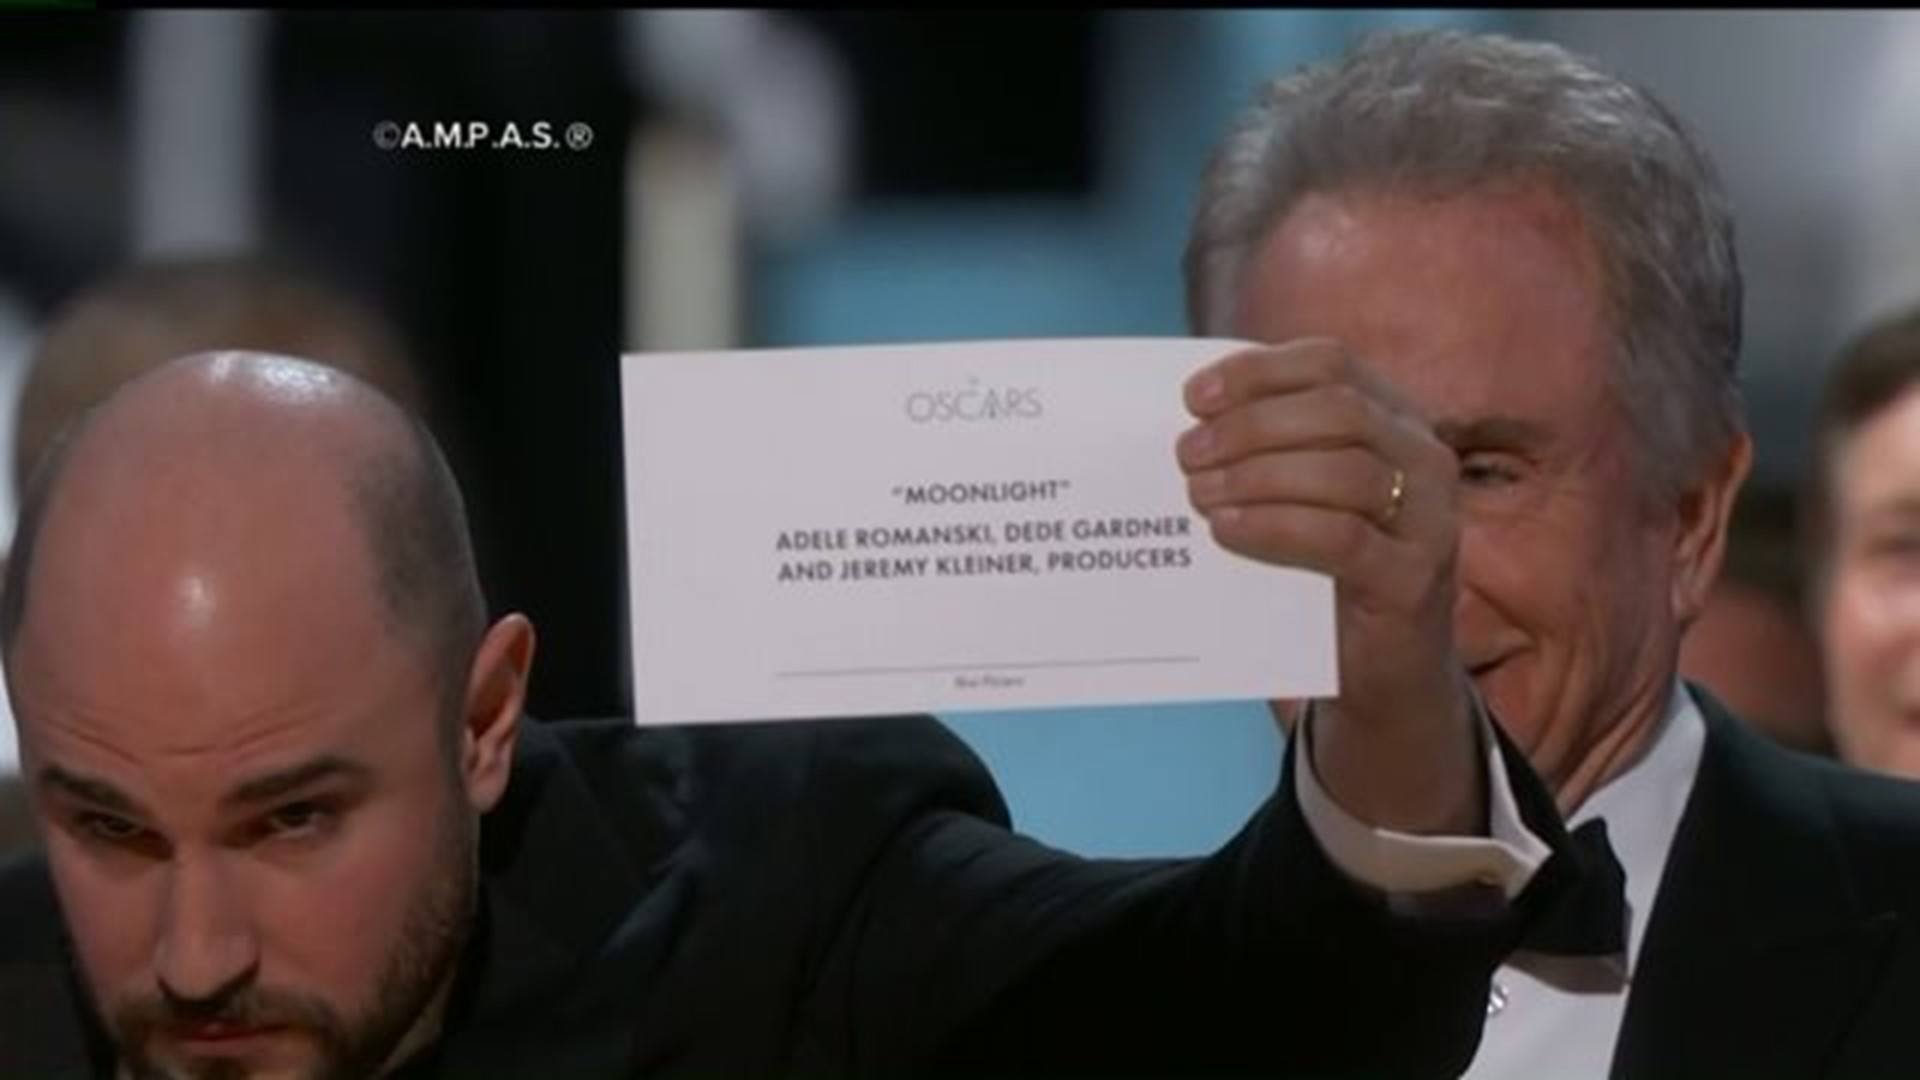 Uh Oh, Oscars! Moviegoers Confused by Oscars Mishap